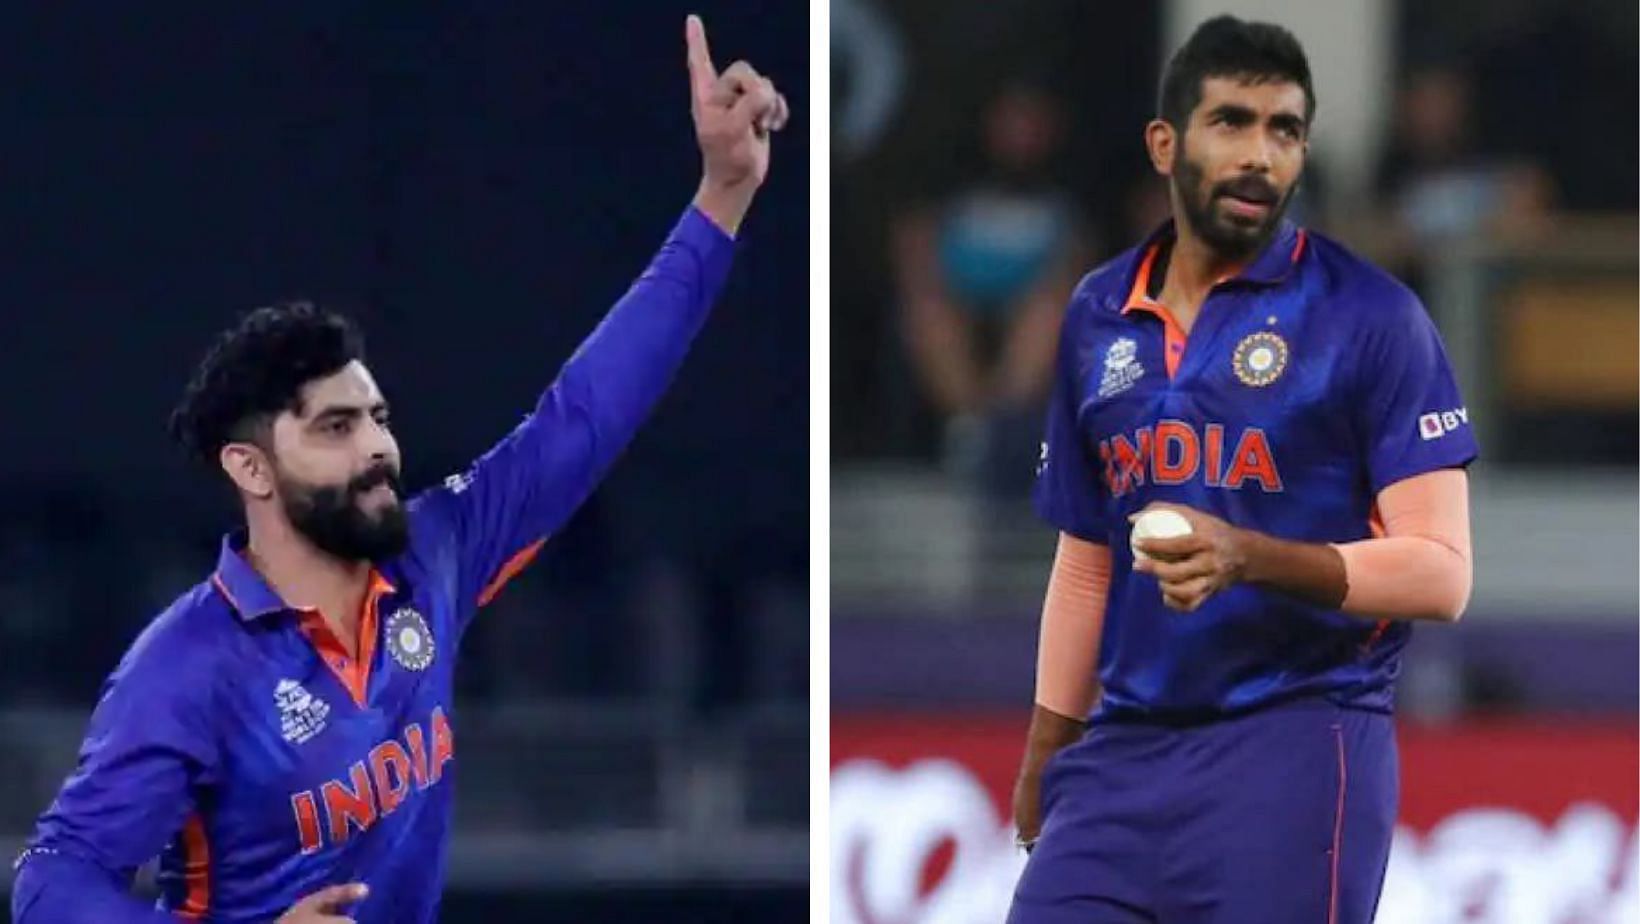 Bumrah and Jadeja starred for India en route to personal achievements.